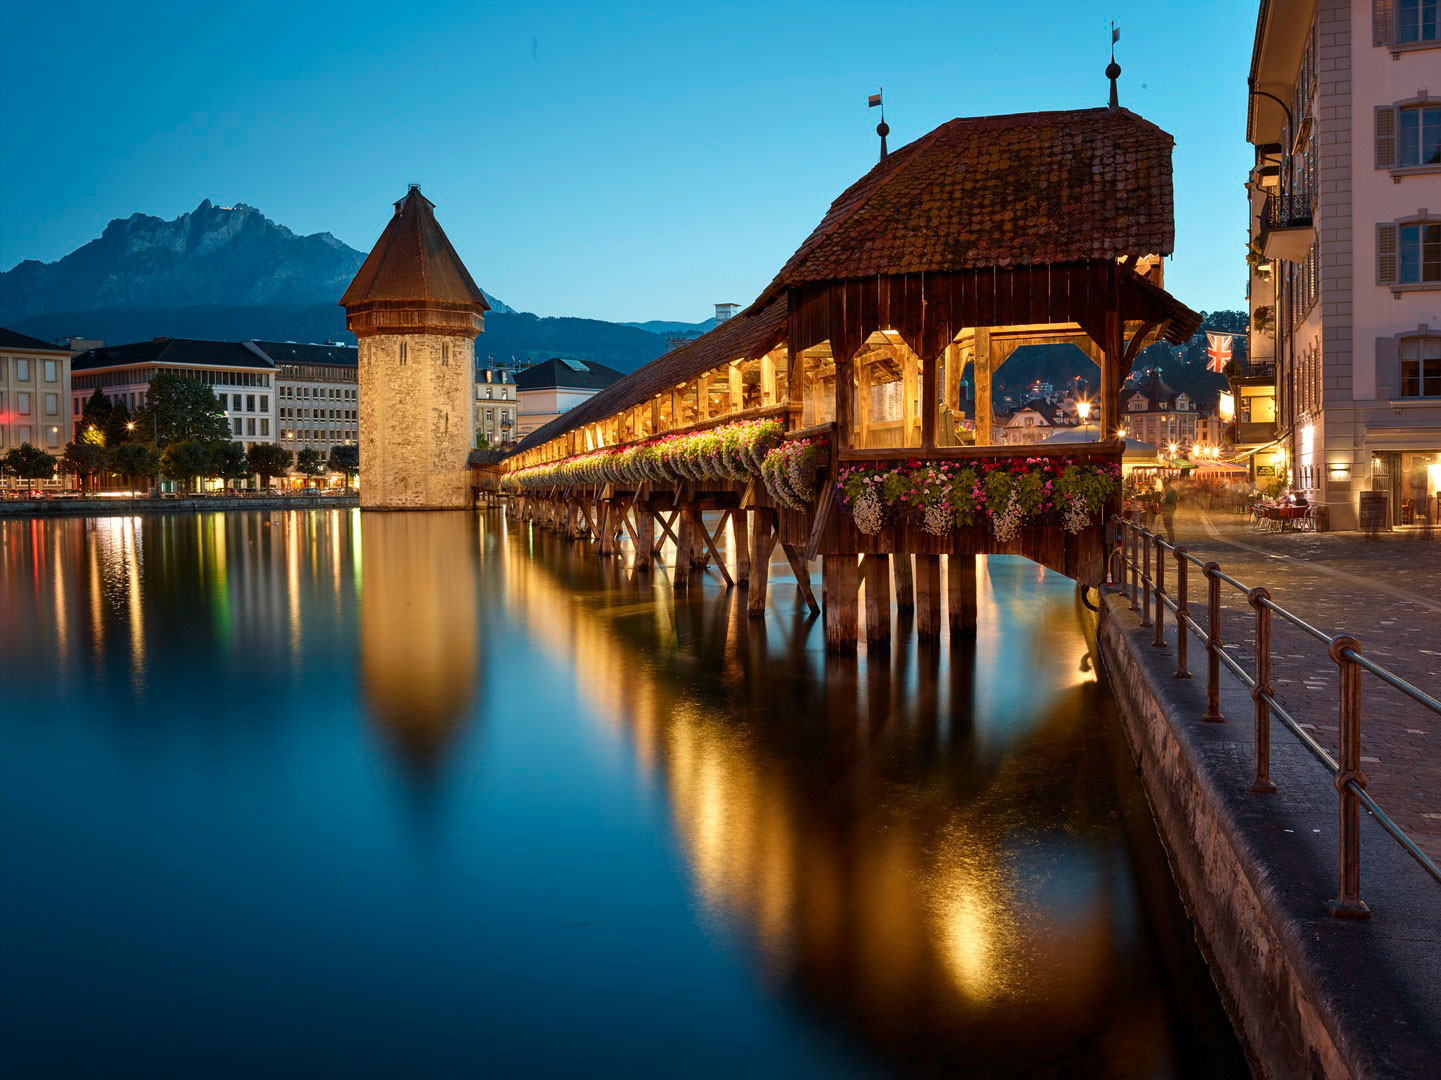 The Winter Universiade in Lucerne will be the first in the Swiss Alps since 1962 ©Lucerne 2021